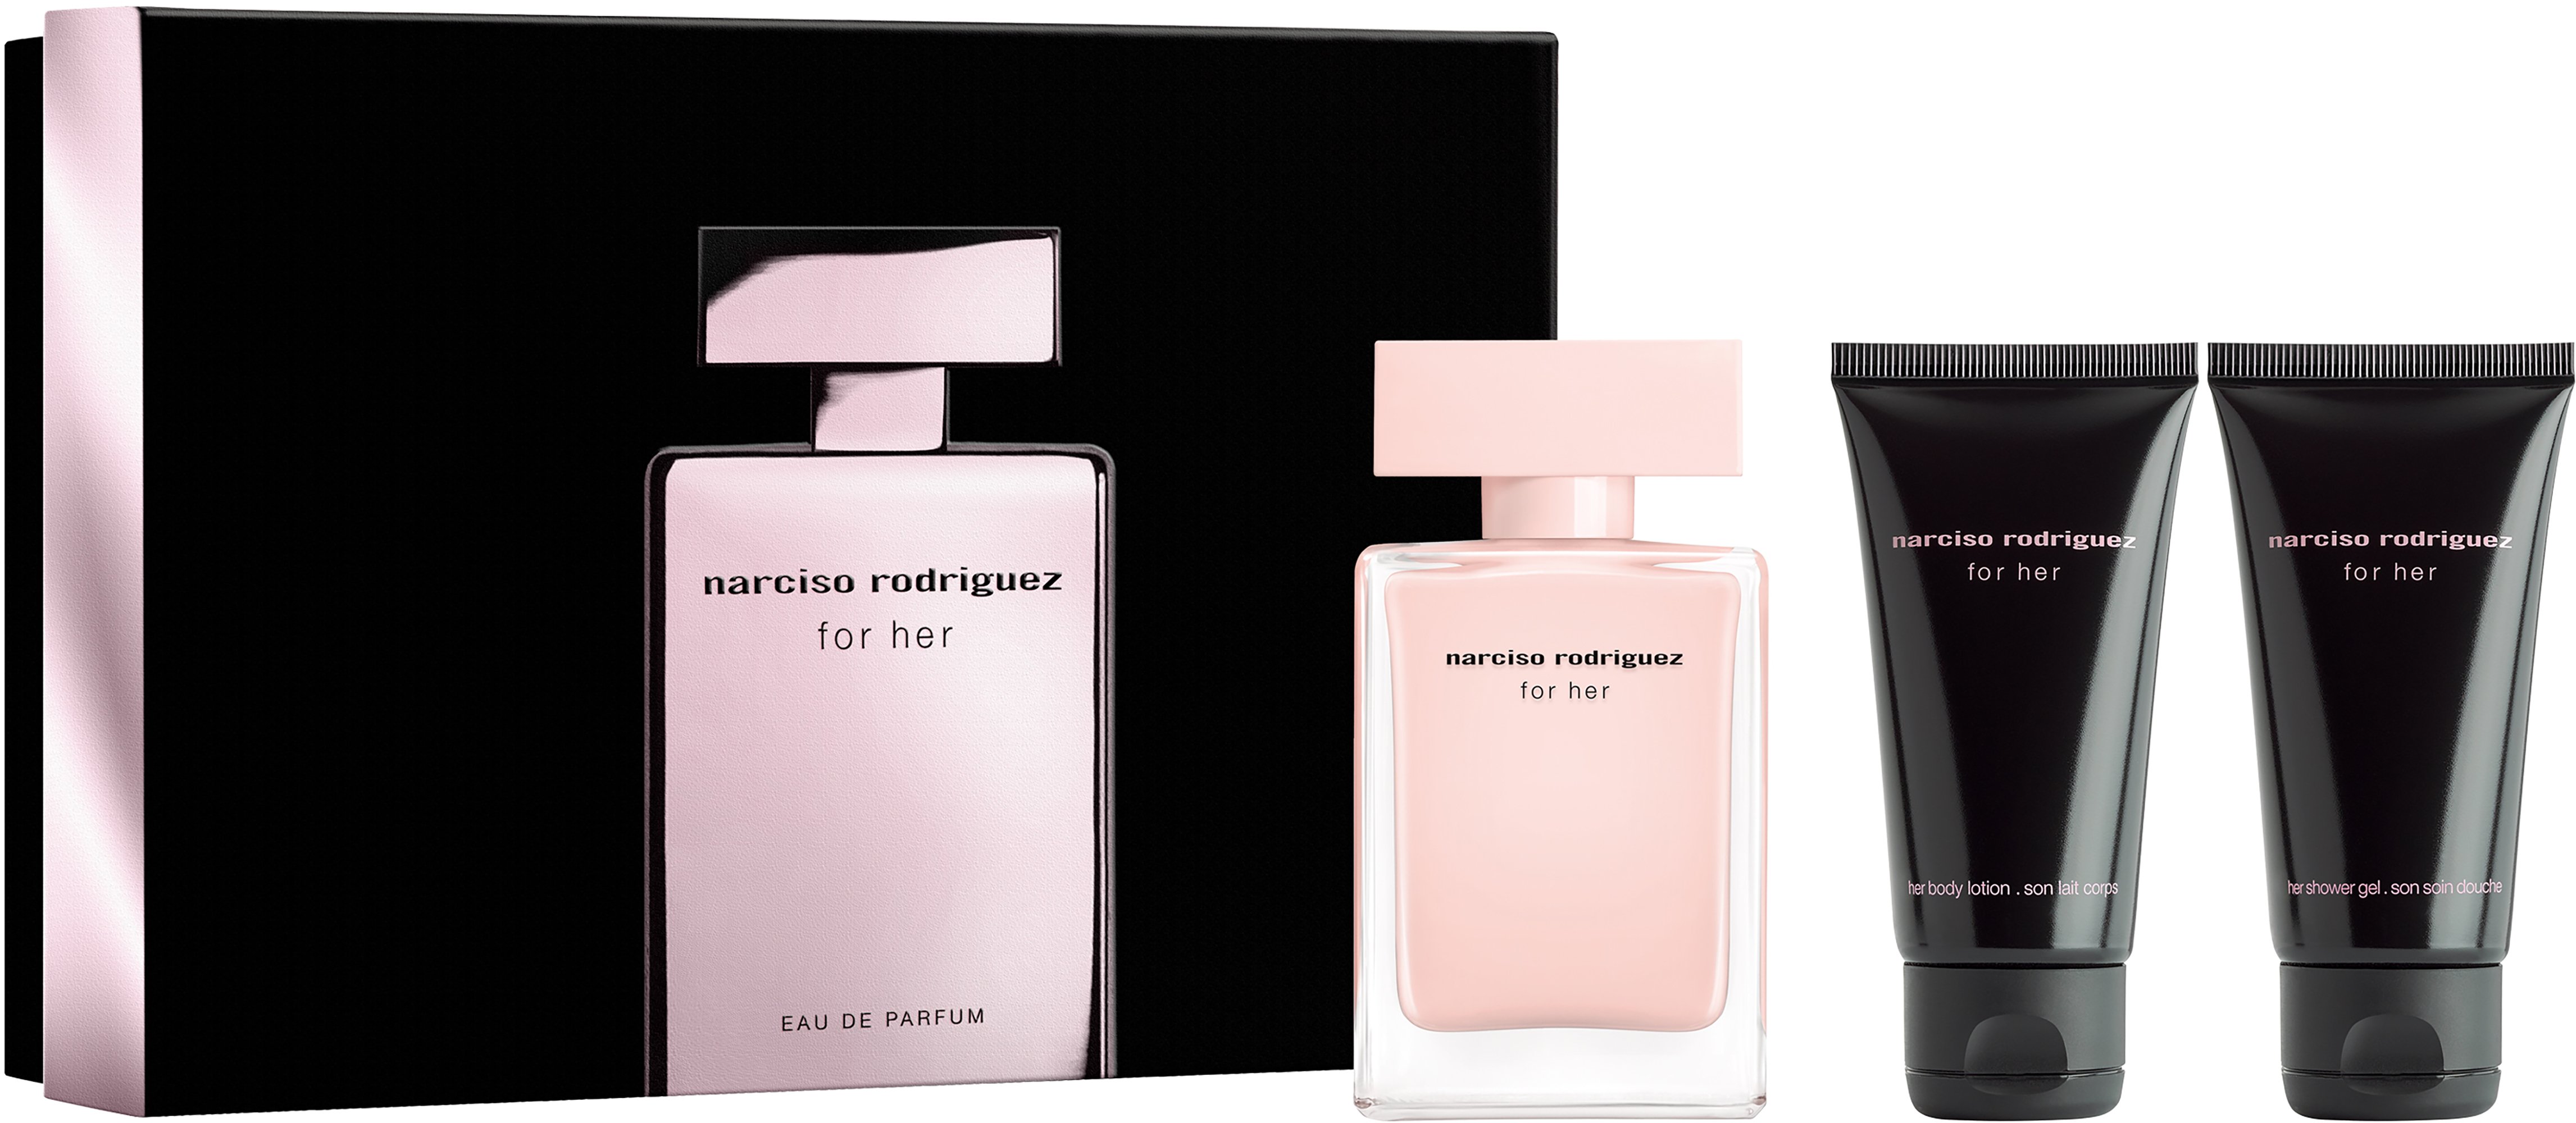 Gel 50 Body ml EDP 50 - Giftset Buy - Lotion For Shower Narciso Rodriguez + shipping - Her Free 50 ml+